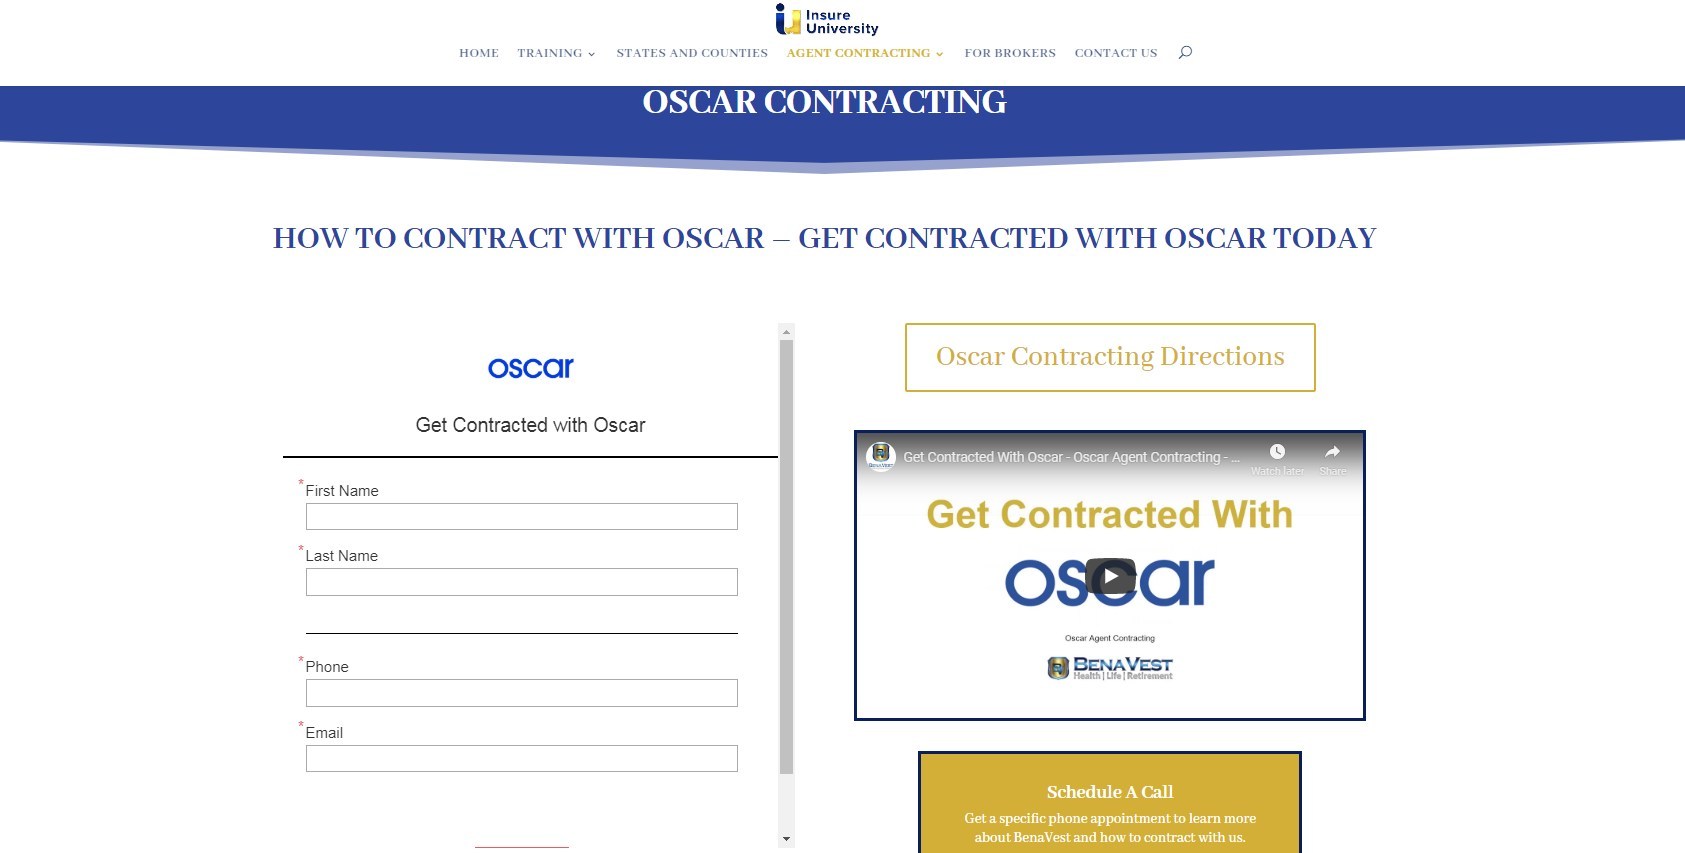 BenaVest's New AI Oscar Agent Contracting Portal Makes Life Easy for Agents to Get Appointed With Oscar